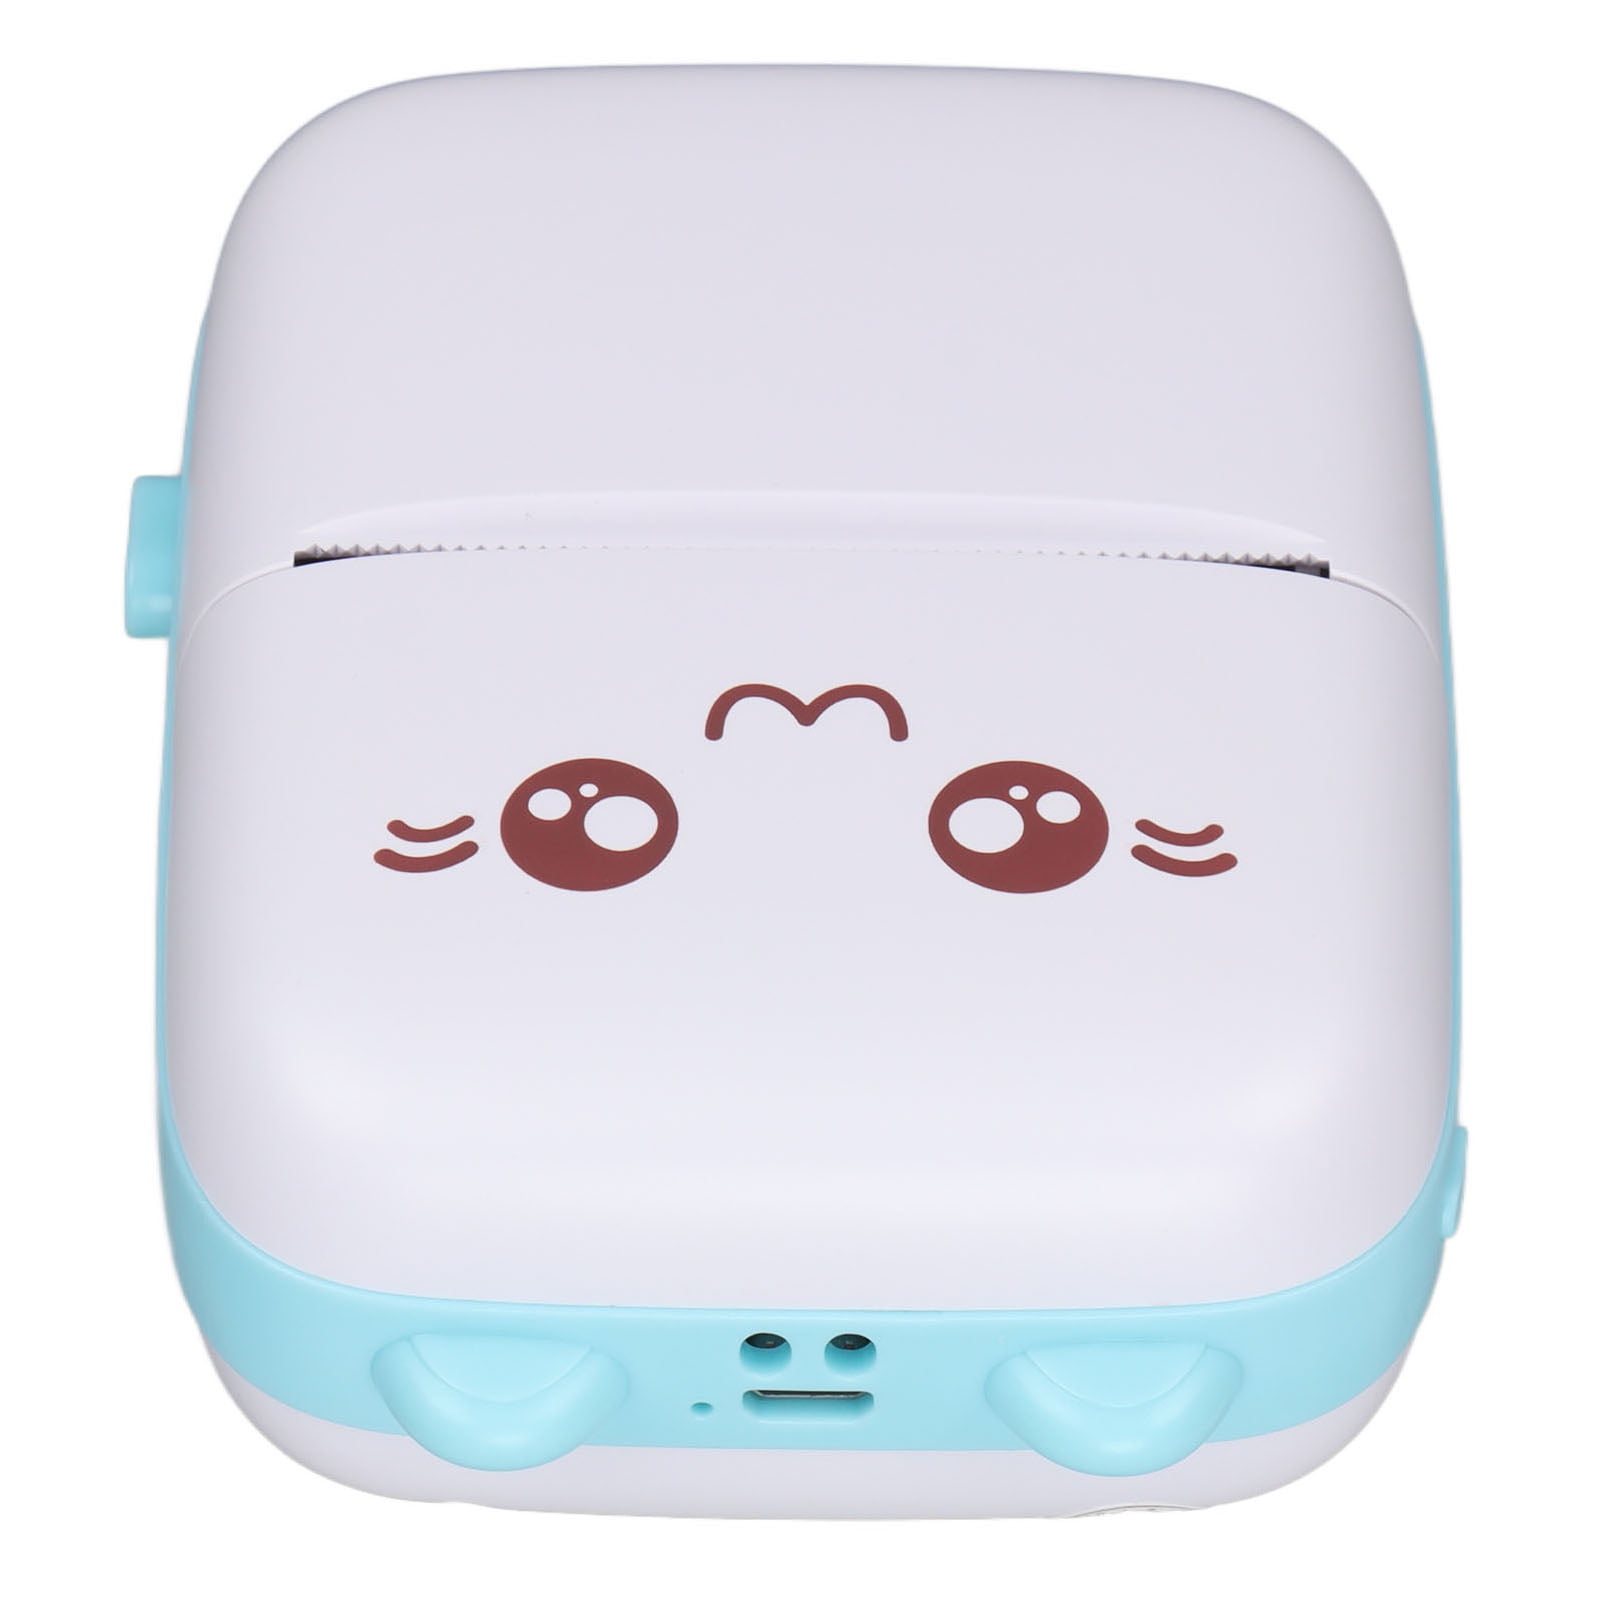 Doodle Dash Printer Mini Printer Sticker Maker Bluetooth Connection Cell  Phone, Tablet with 5 Self-Adhesive Rolls Printing Paper Wireless Inkless